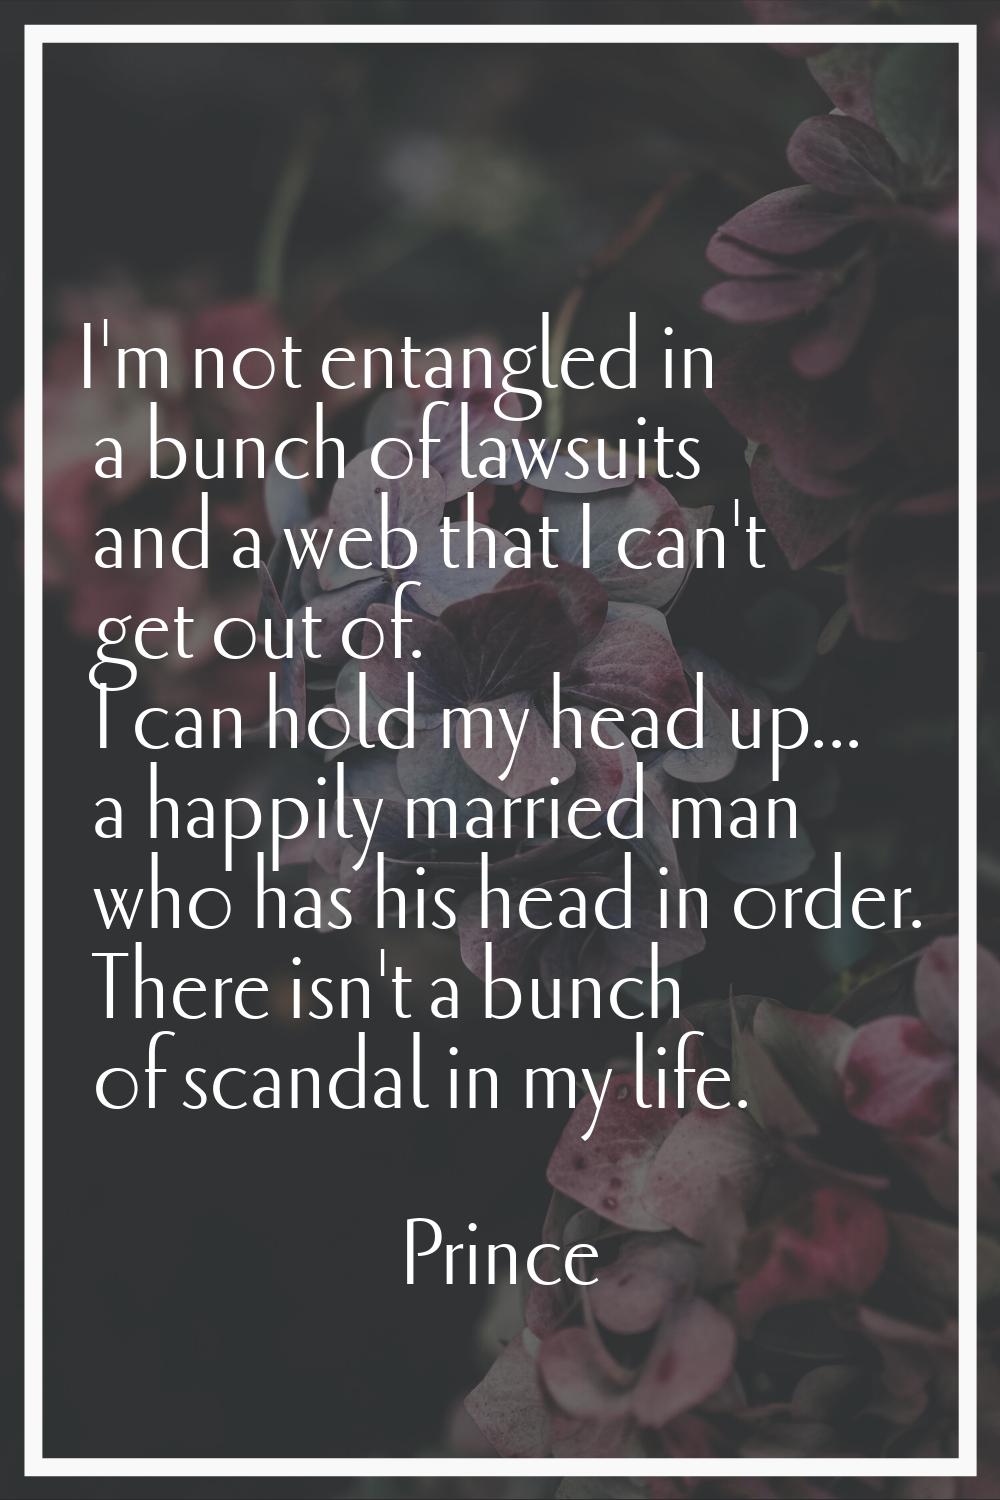 I'm not entangled in a bunch of lawsuits and a web that I can't get out of. I can hold my head up..